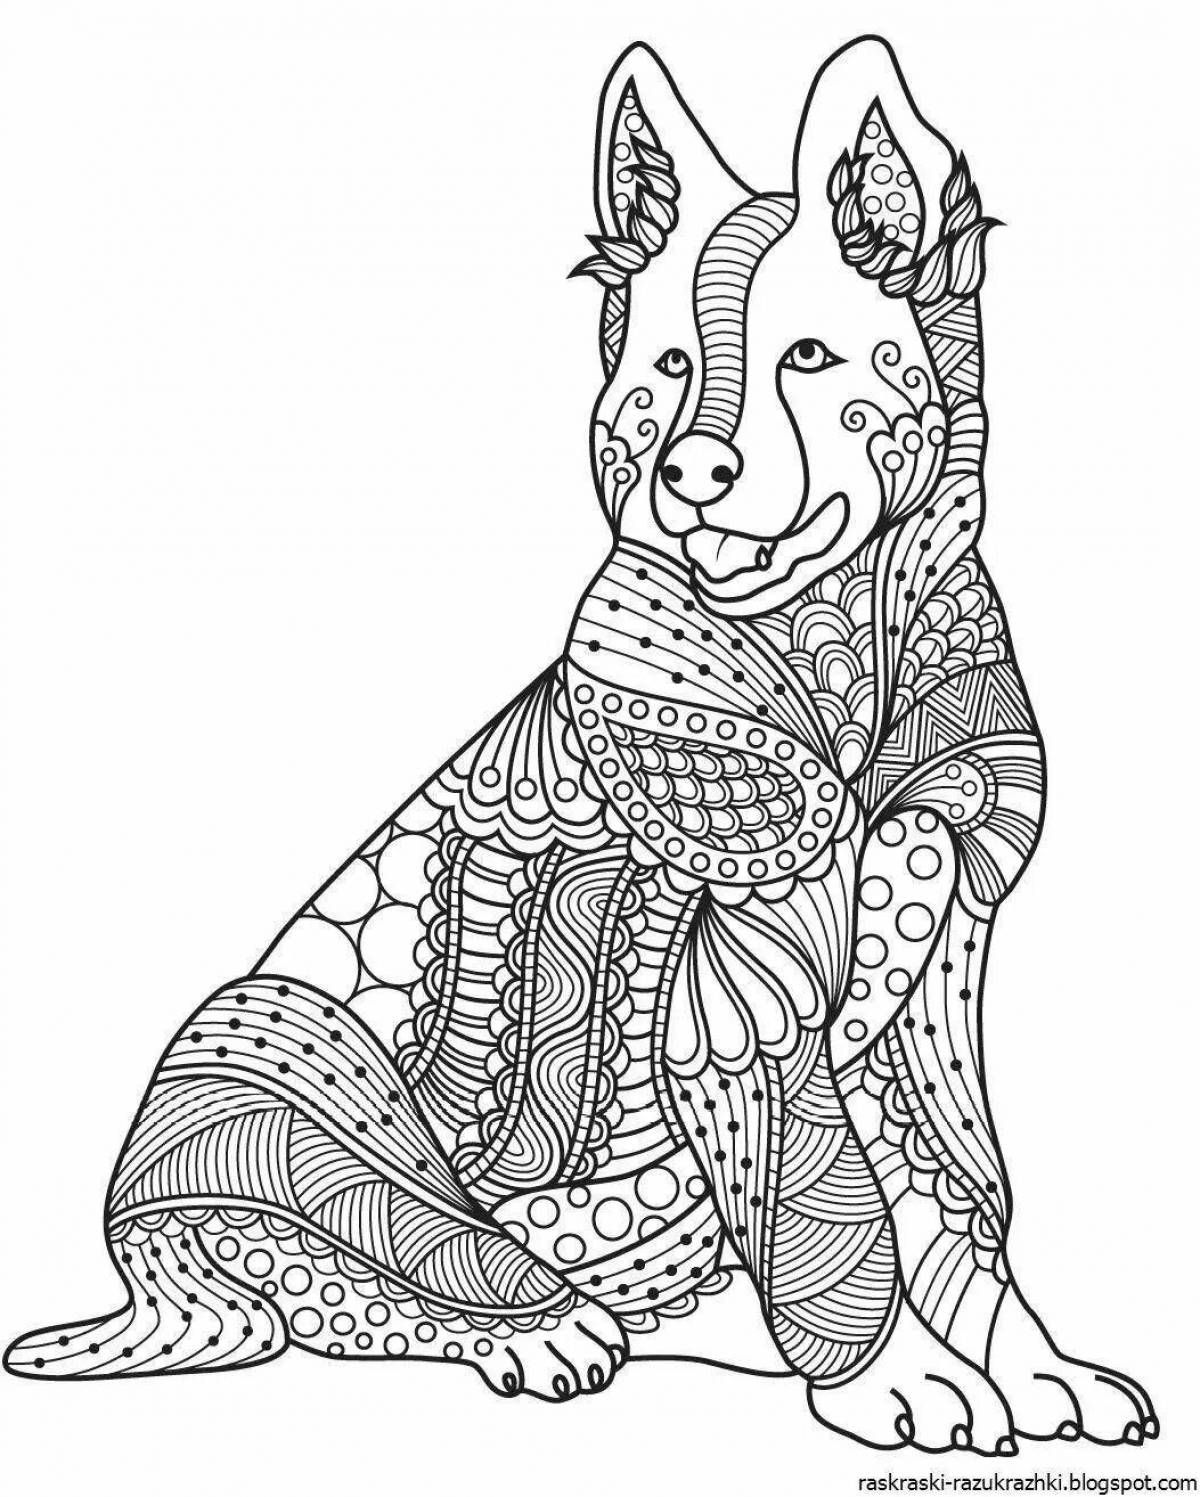 Playful stress relief animal coloring book for kids